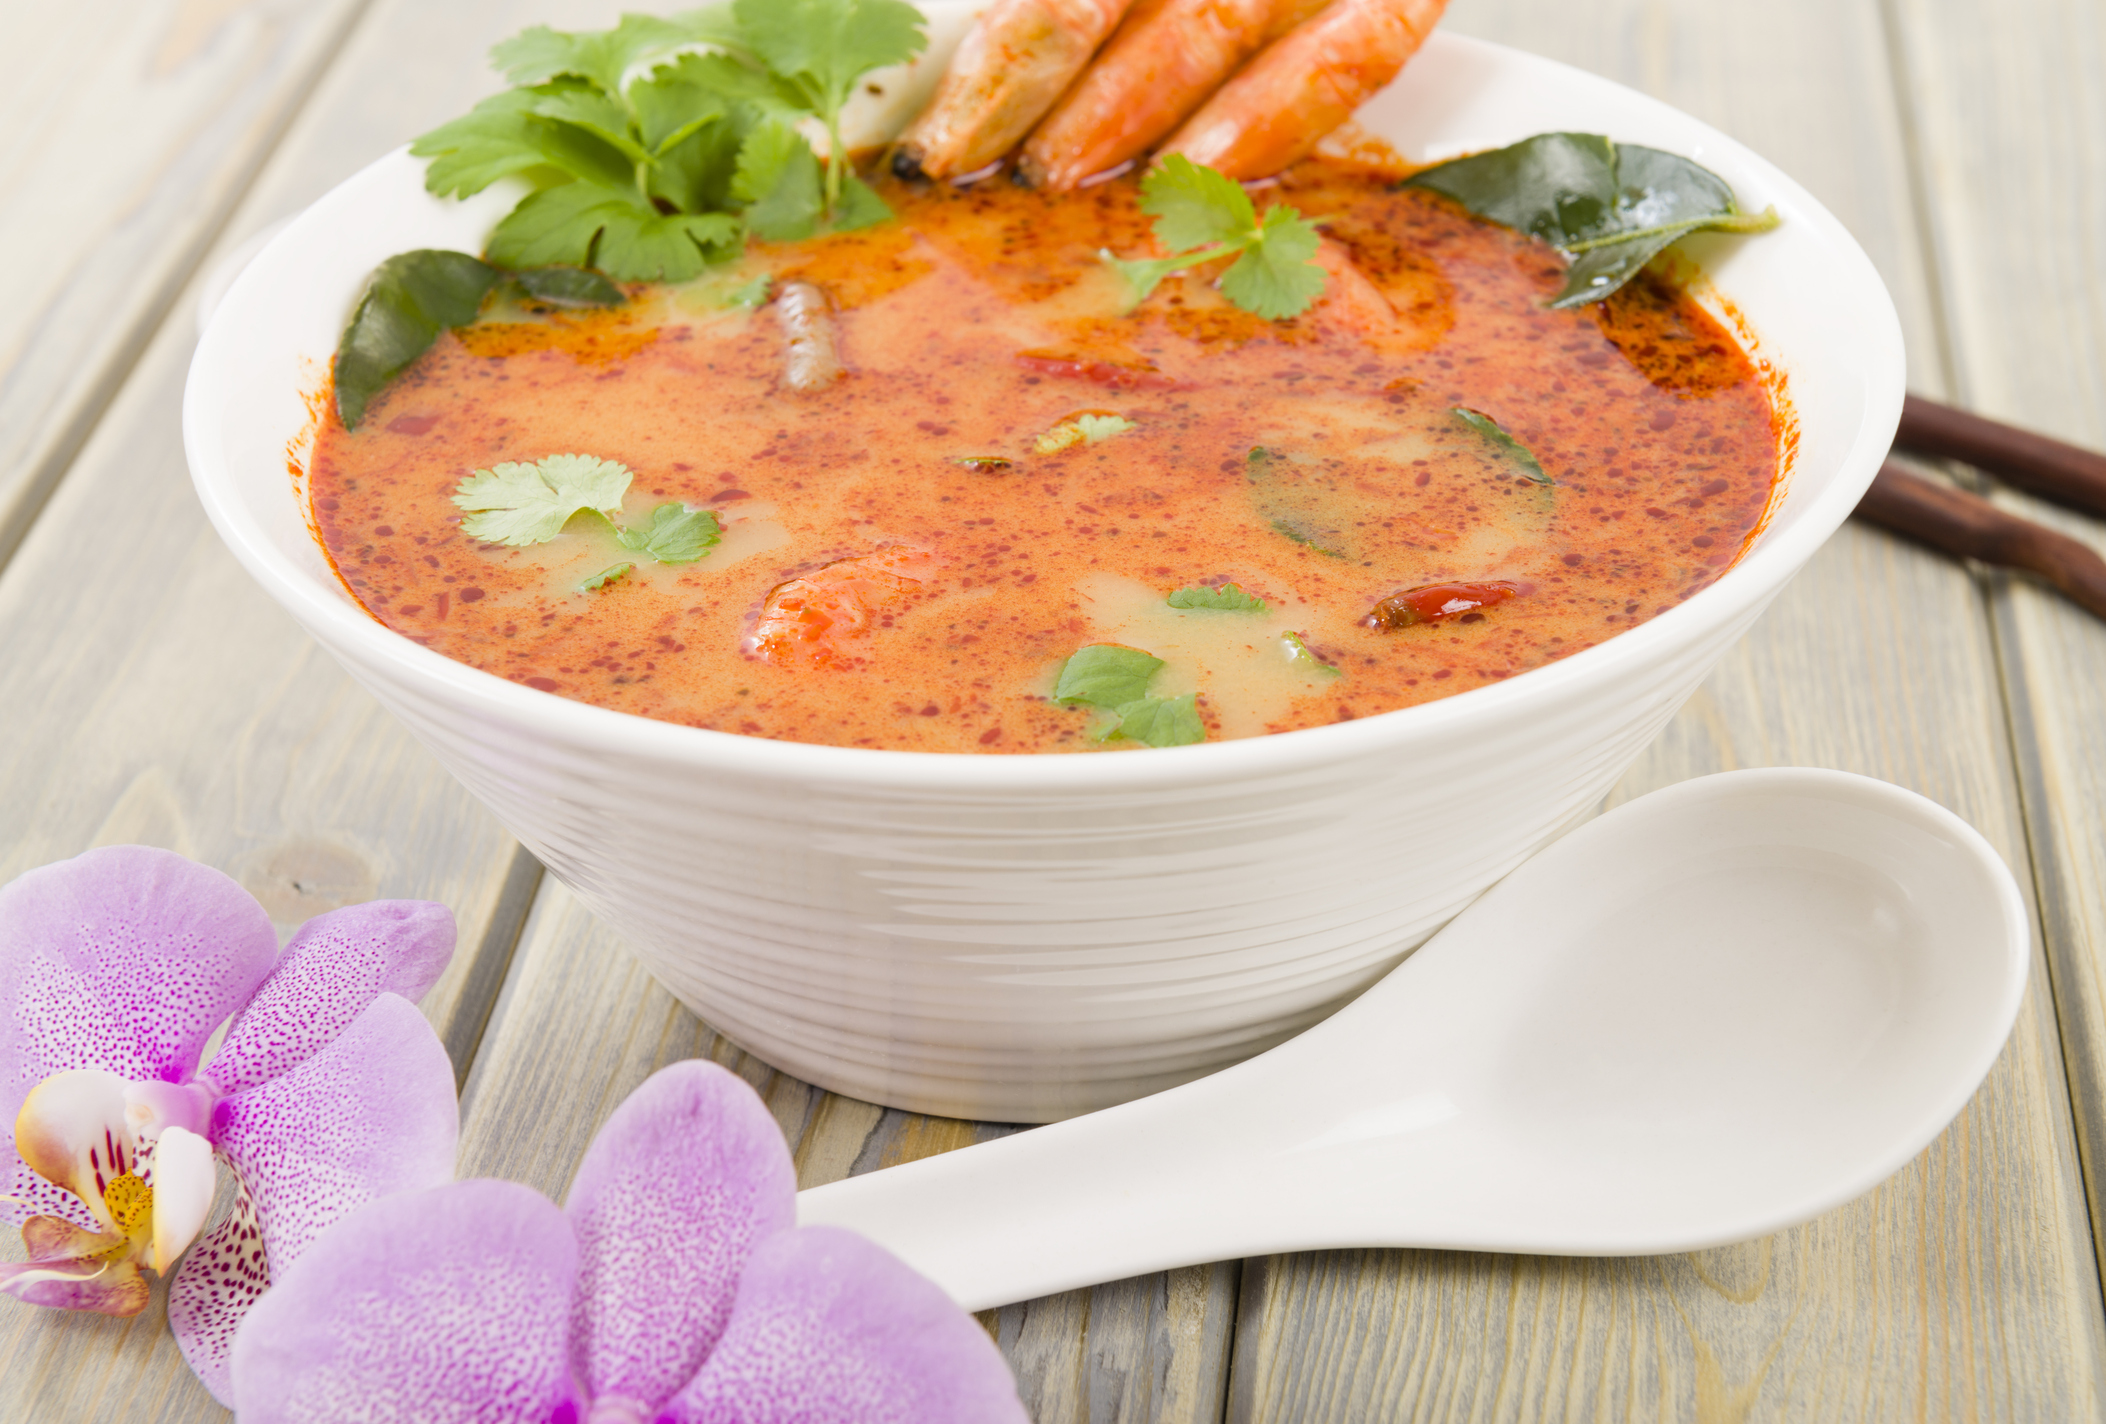 Creamy Thai soup with prawns and mushrooms garnished with coriander leaves and served with lime wedges.